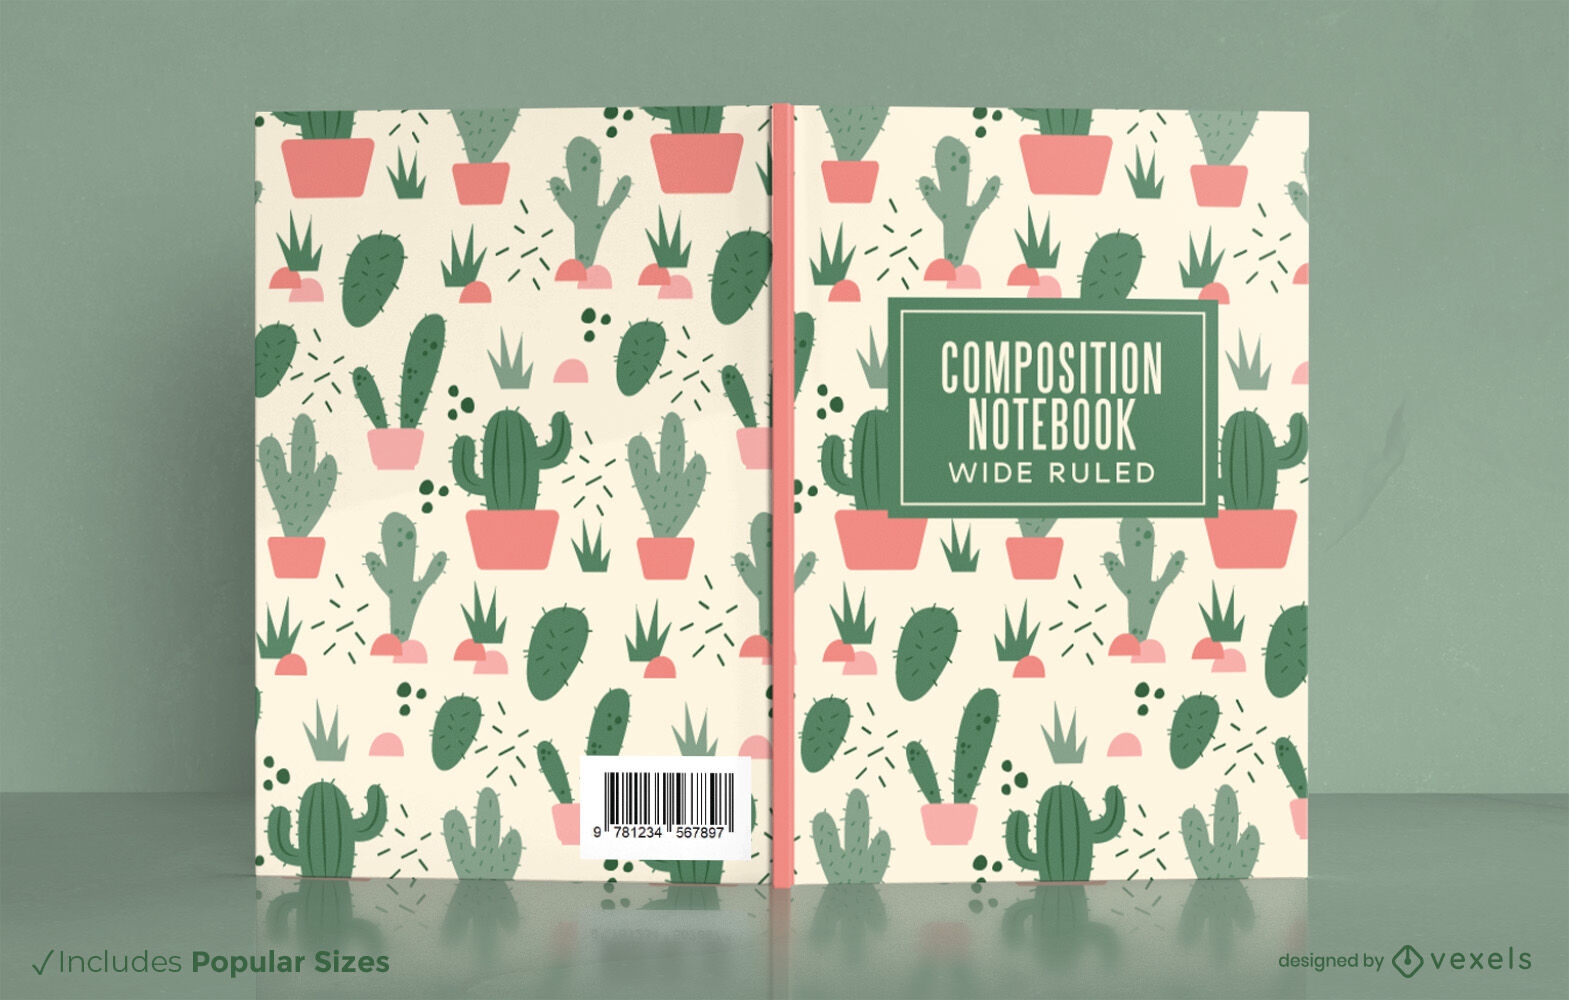 Cactus and plants book cover design